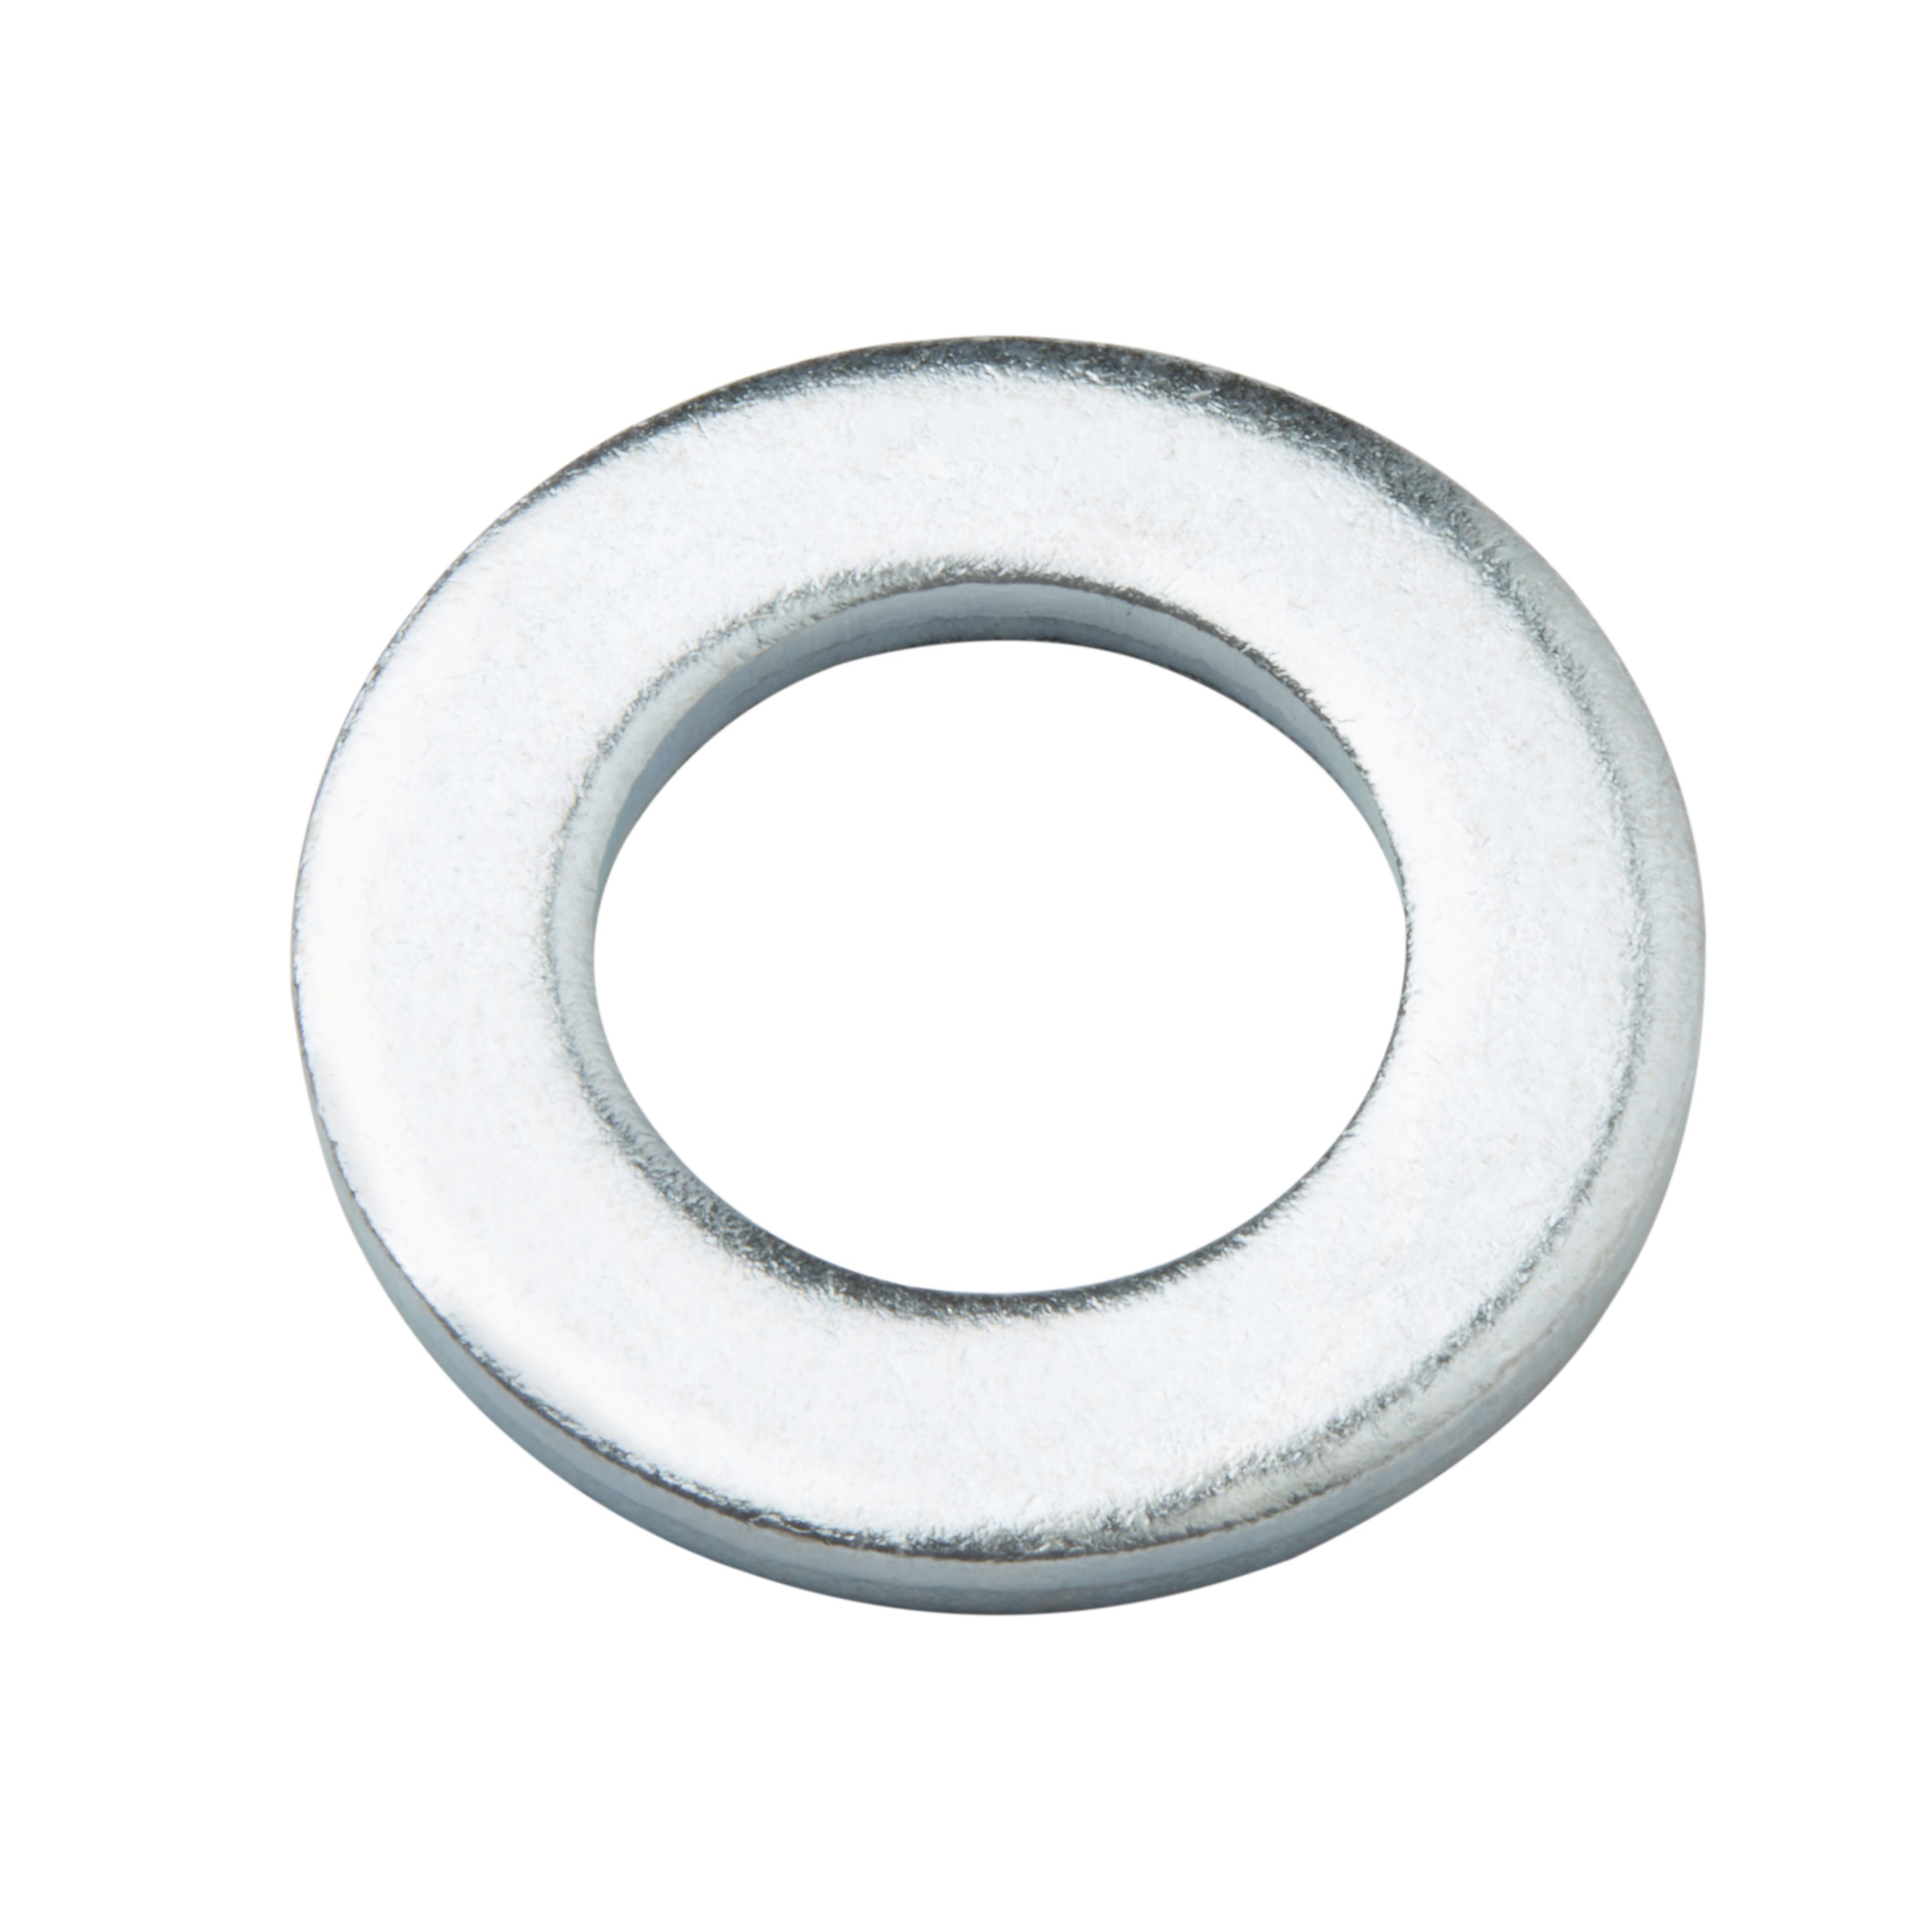 Diall M16 Carbon steel Flat Washer, (Dia)16mm, Pack of 20